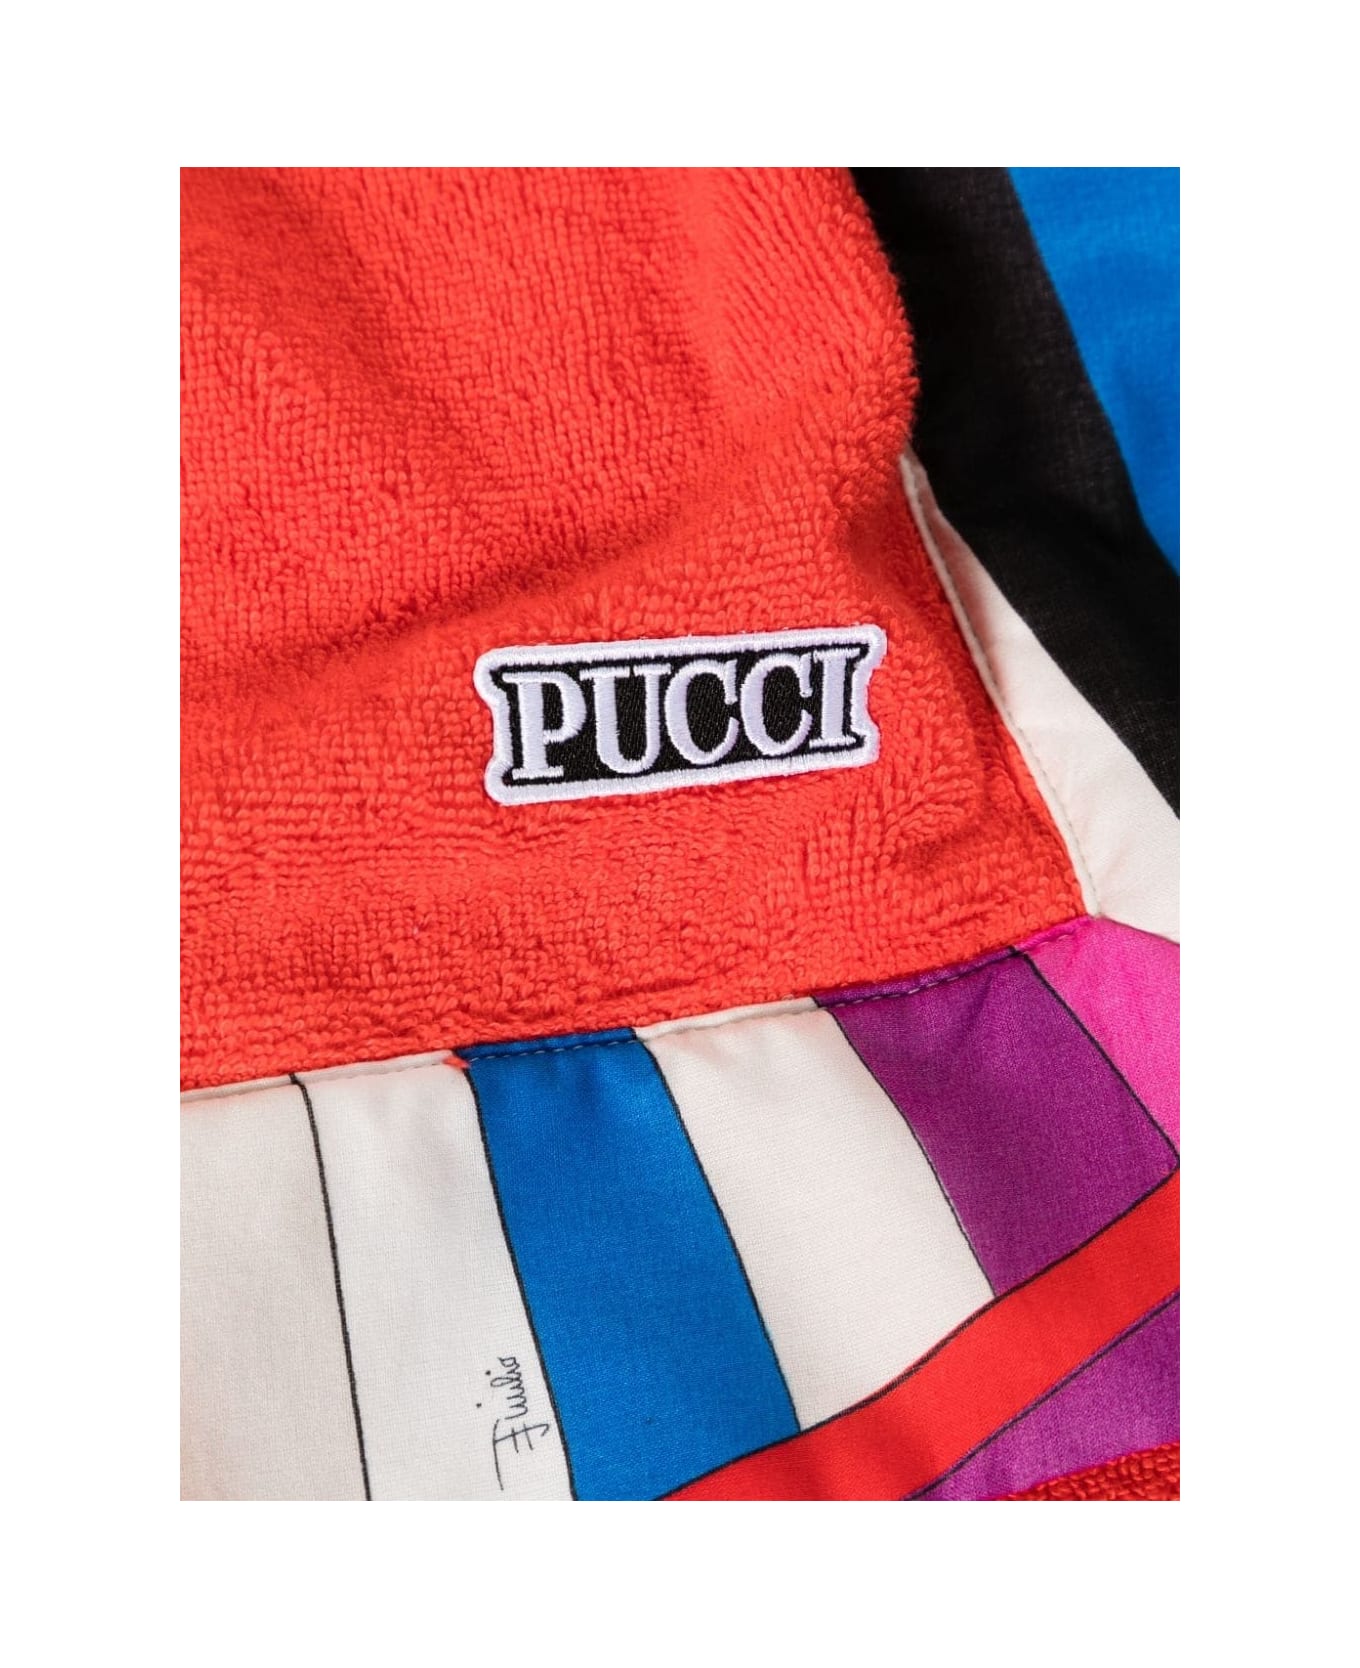 Pucci Red Beach Towel With Iride Print Border - Red アクセサリー＆ギフト